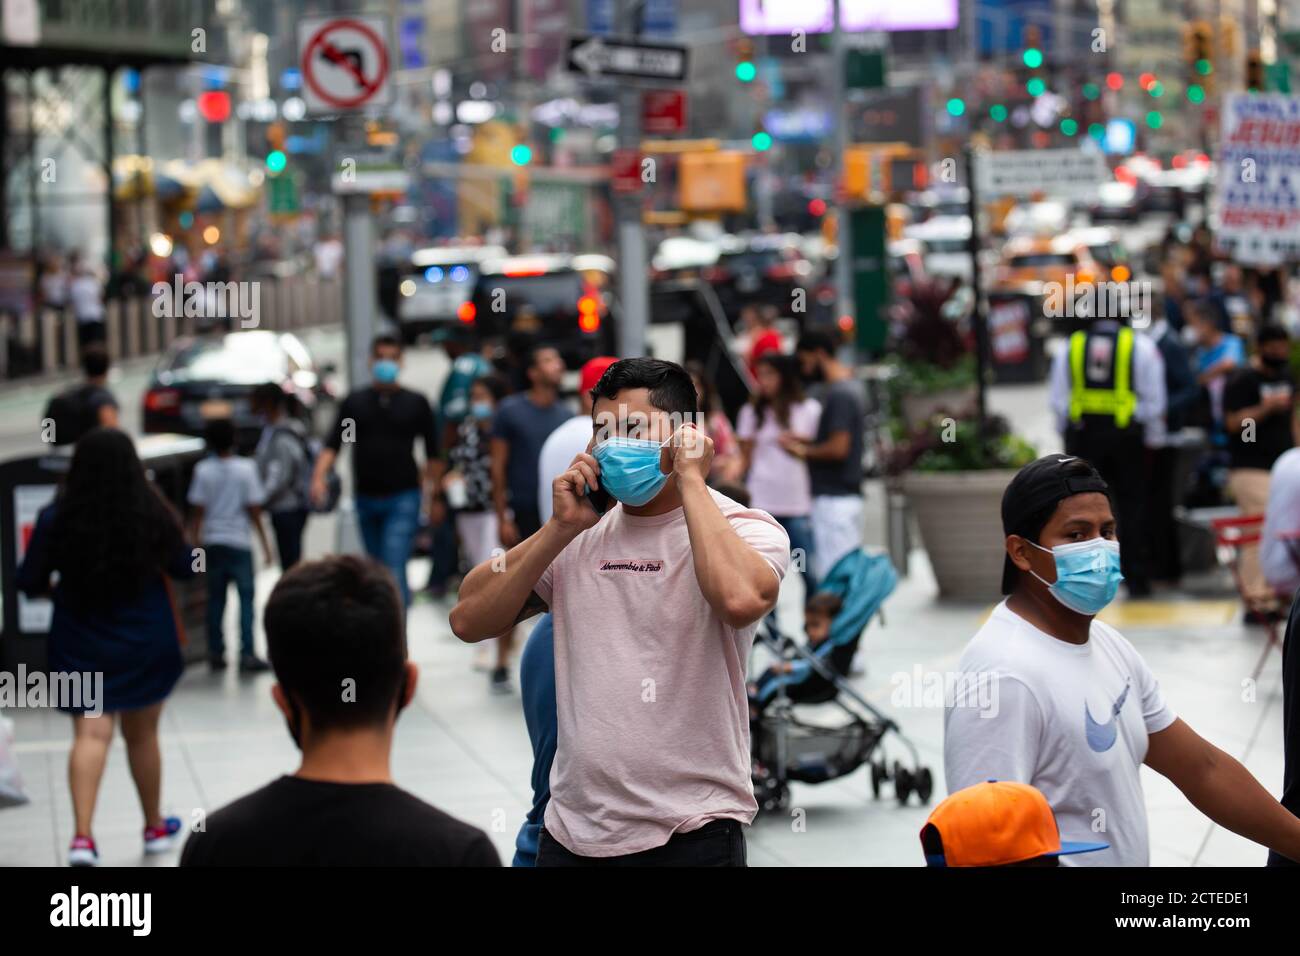 Washington, USA. 13th Sep, 2020. People walk in Times Square during the COVID-19 pandemic in New York, the United States, Sept. 13, 2020. Credit: Michael Nagle/Xinhua/Alamy Live News Stock Photo